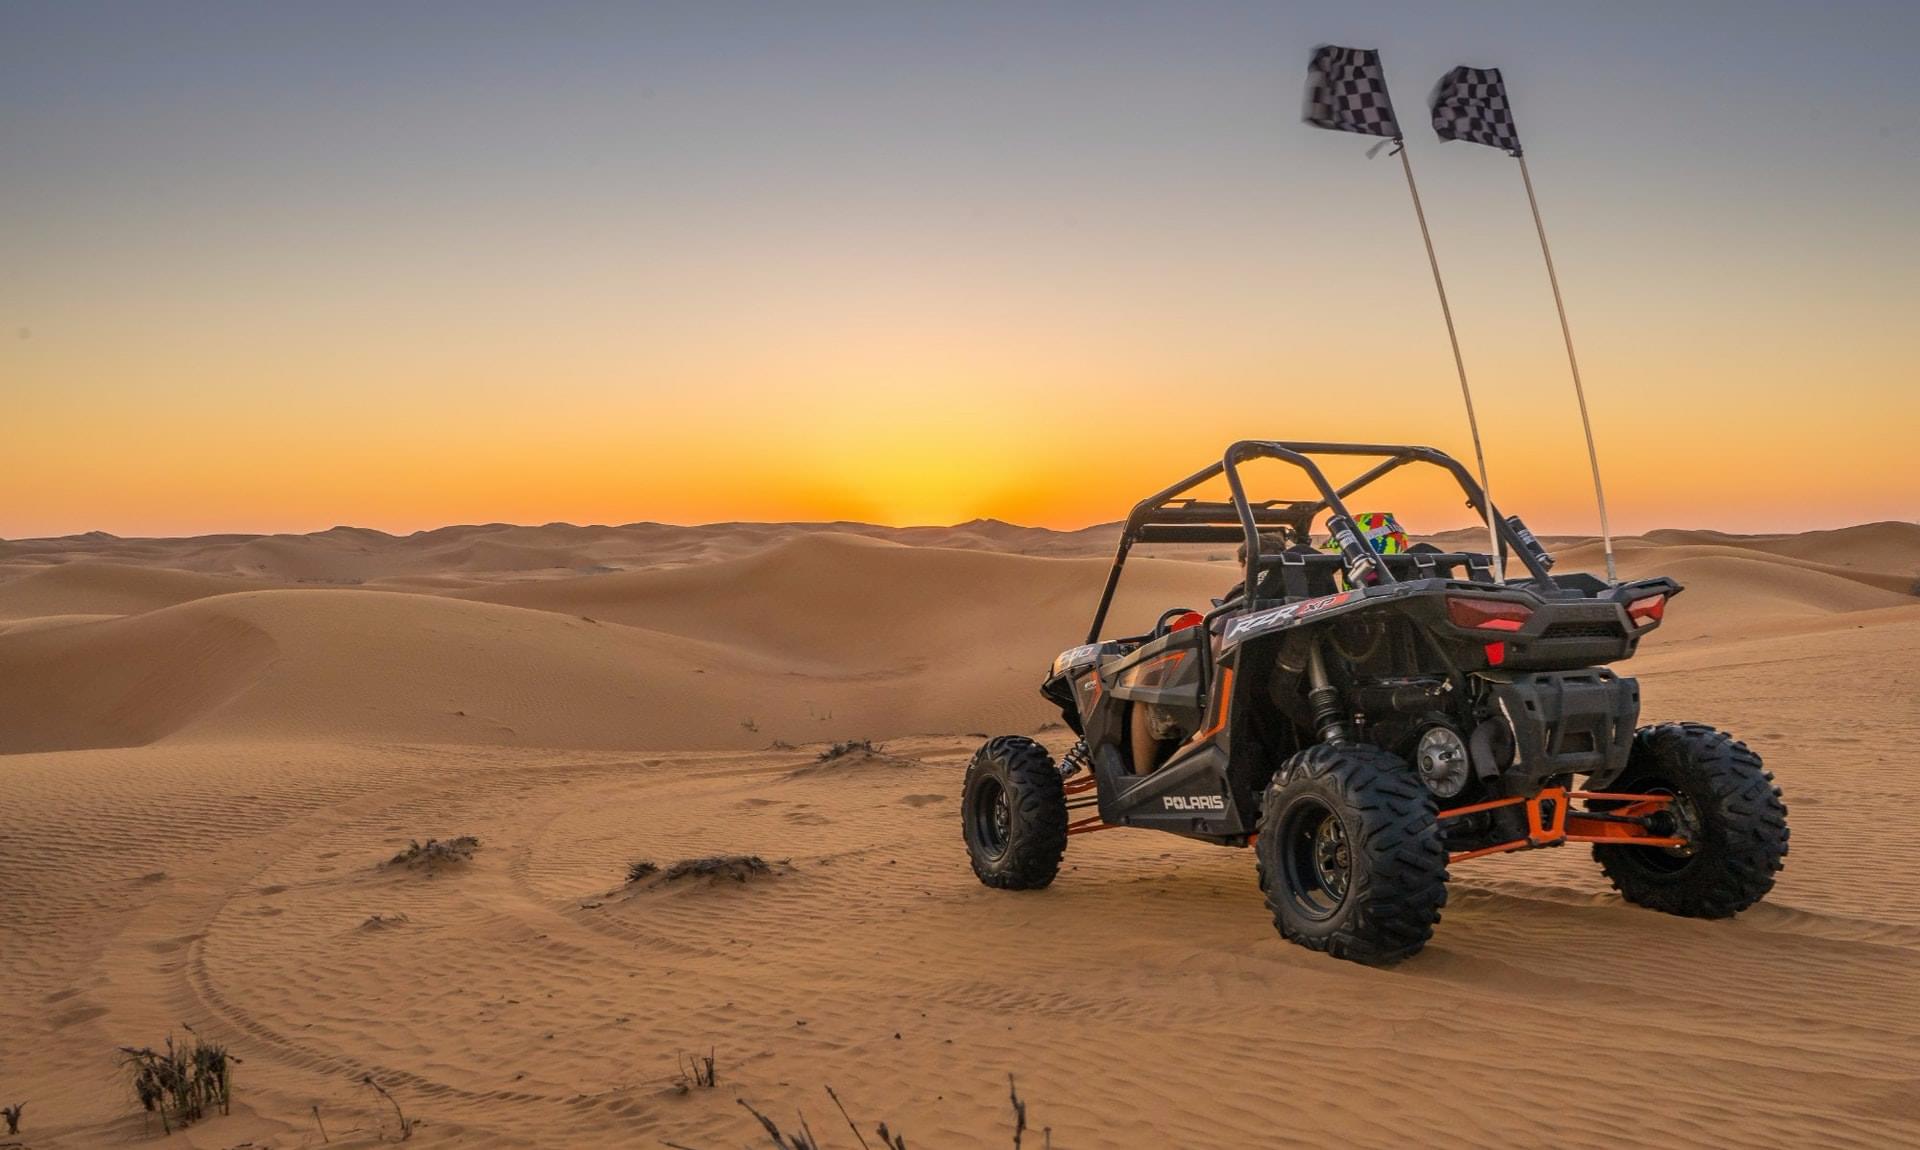 Master your driving skills in Abu Dhabi deserts dunes on this Polaris off road buggy.